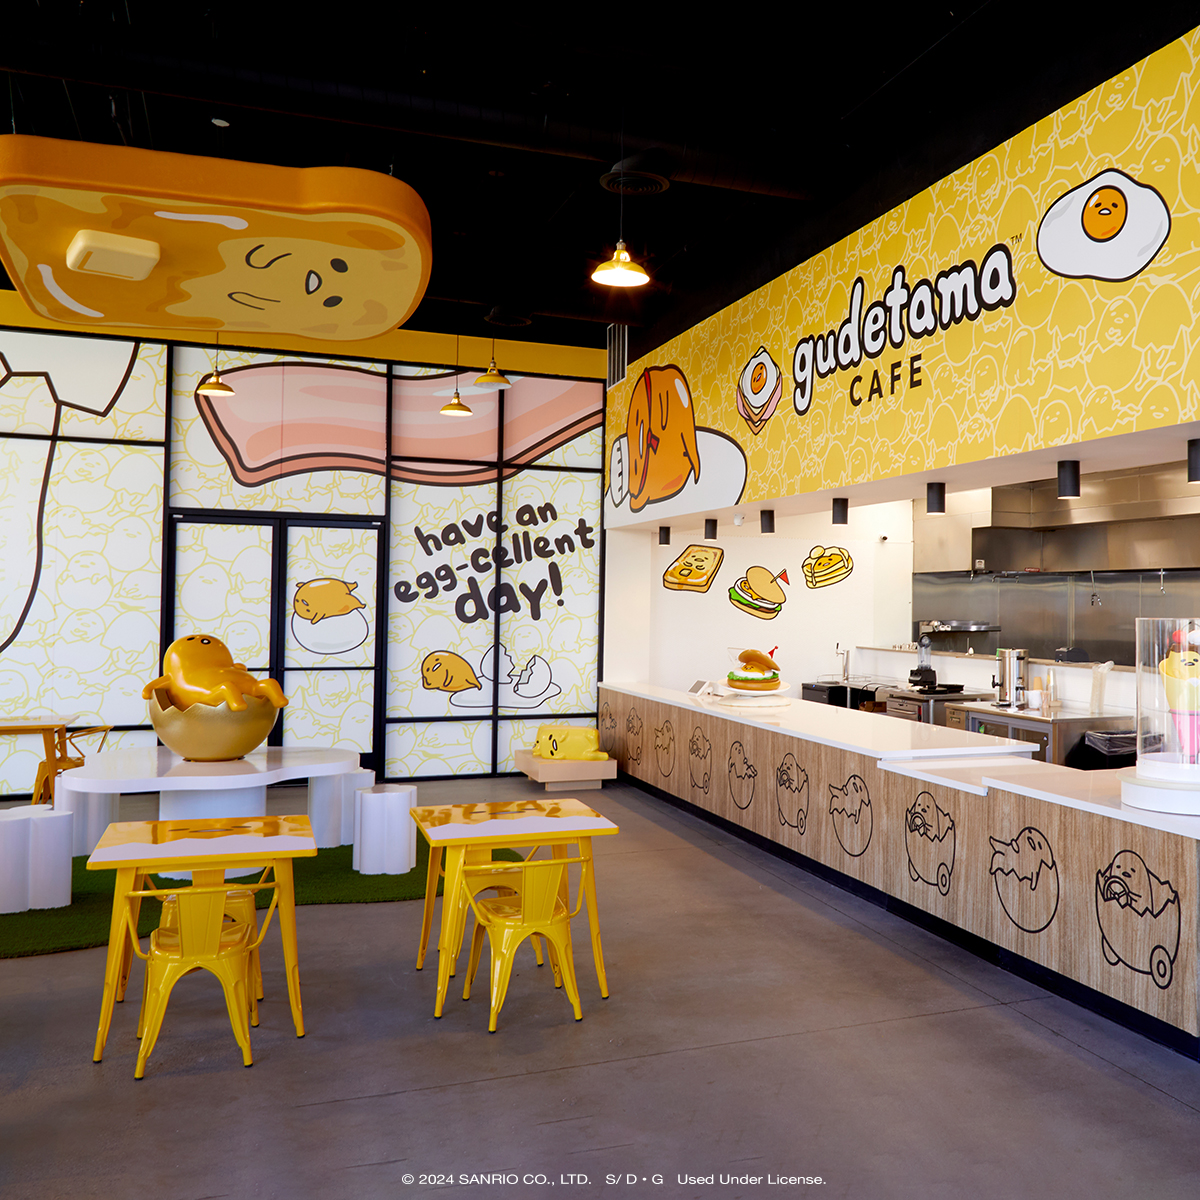 🍳NOW OPEN 🍳 Gudetama Cafe in Buena Park is now open! Stop by for some egg-cellent treats and drinks starting today at 11am ✨⁠ ⁠ 📍8340 La Palma Ave, Buena Park, CA 90620